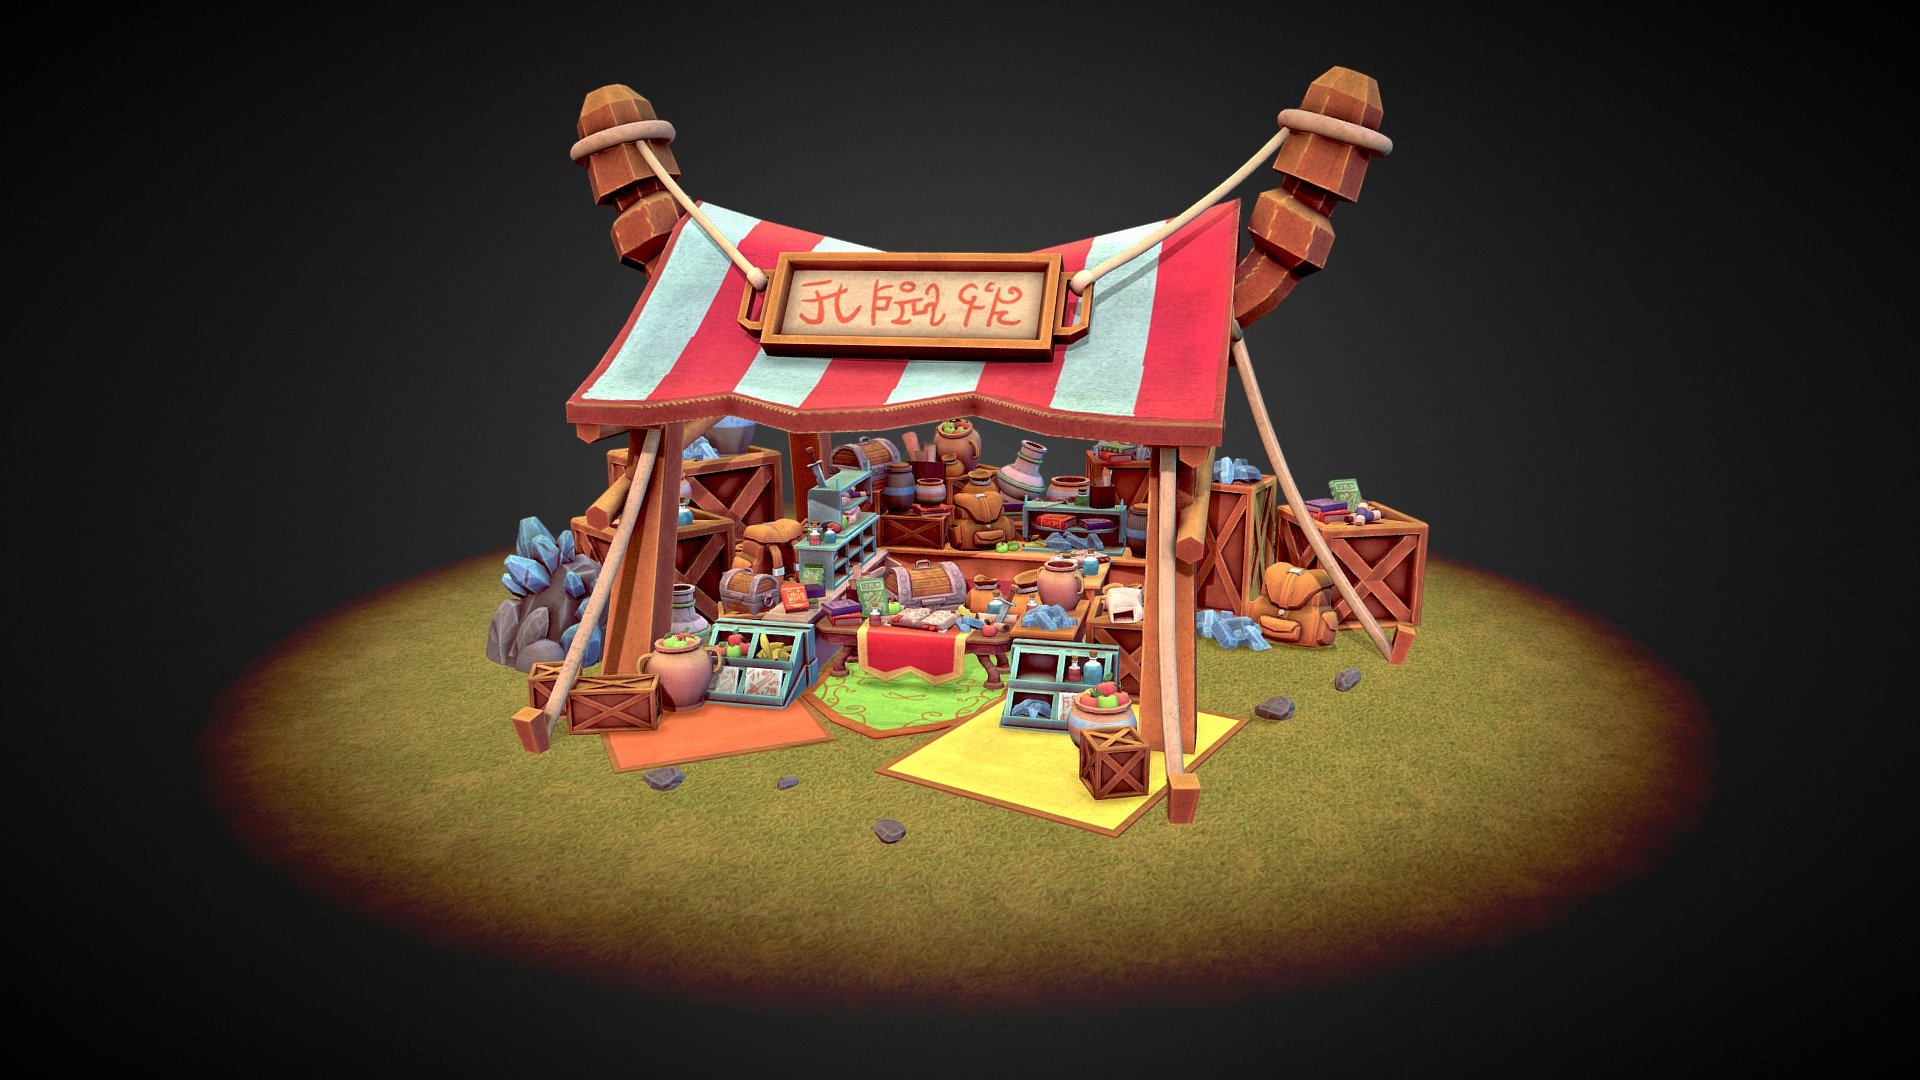 Follow up to my previous model on the Crystal Saga's Crystal Ruins.
This time I wanted to establish that not everything is in shambles and there still is trade going on. Our hero is a shop keeper's son, so making a stall was the next best thing to portray his origin.

Modelled in Maya, sculpted in Zbrush and textured in Substance Painter. Reused one rock asset from my Crystal Ruins model, because the grass looked a little empty 3d model